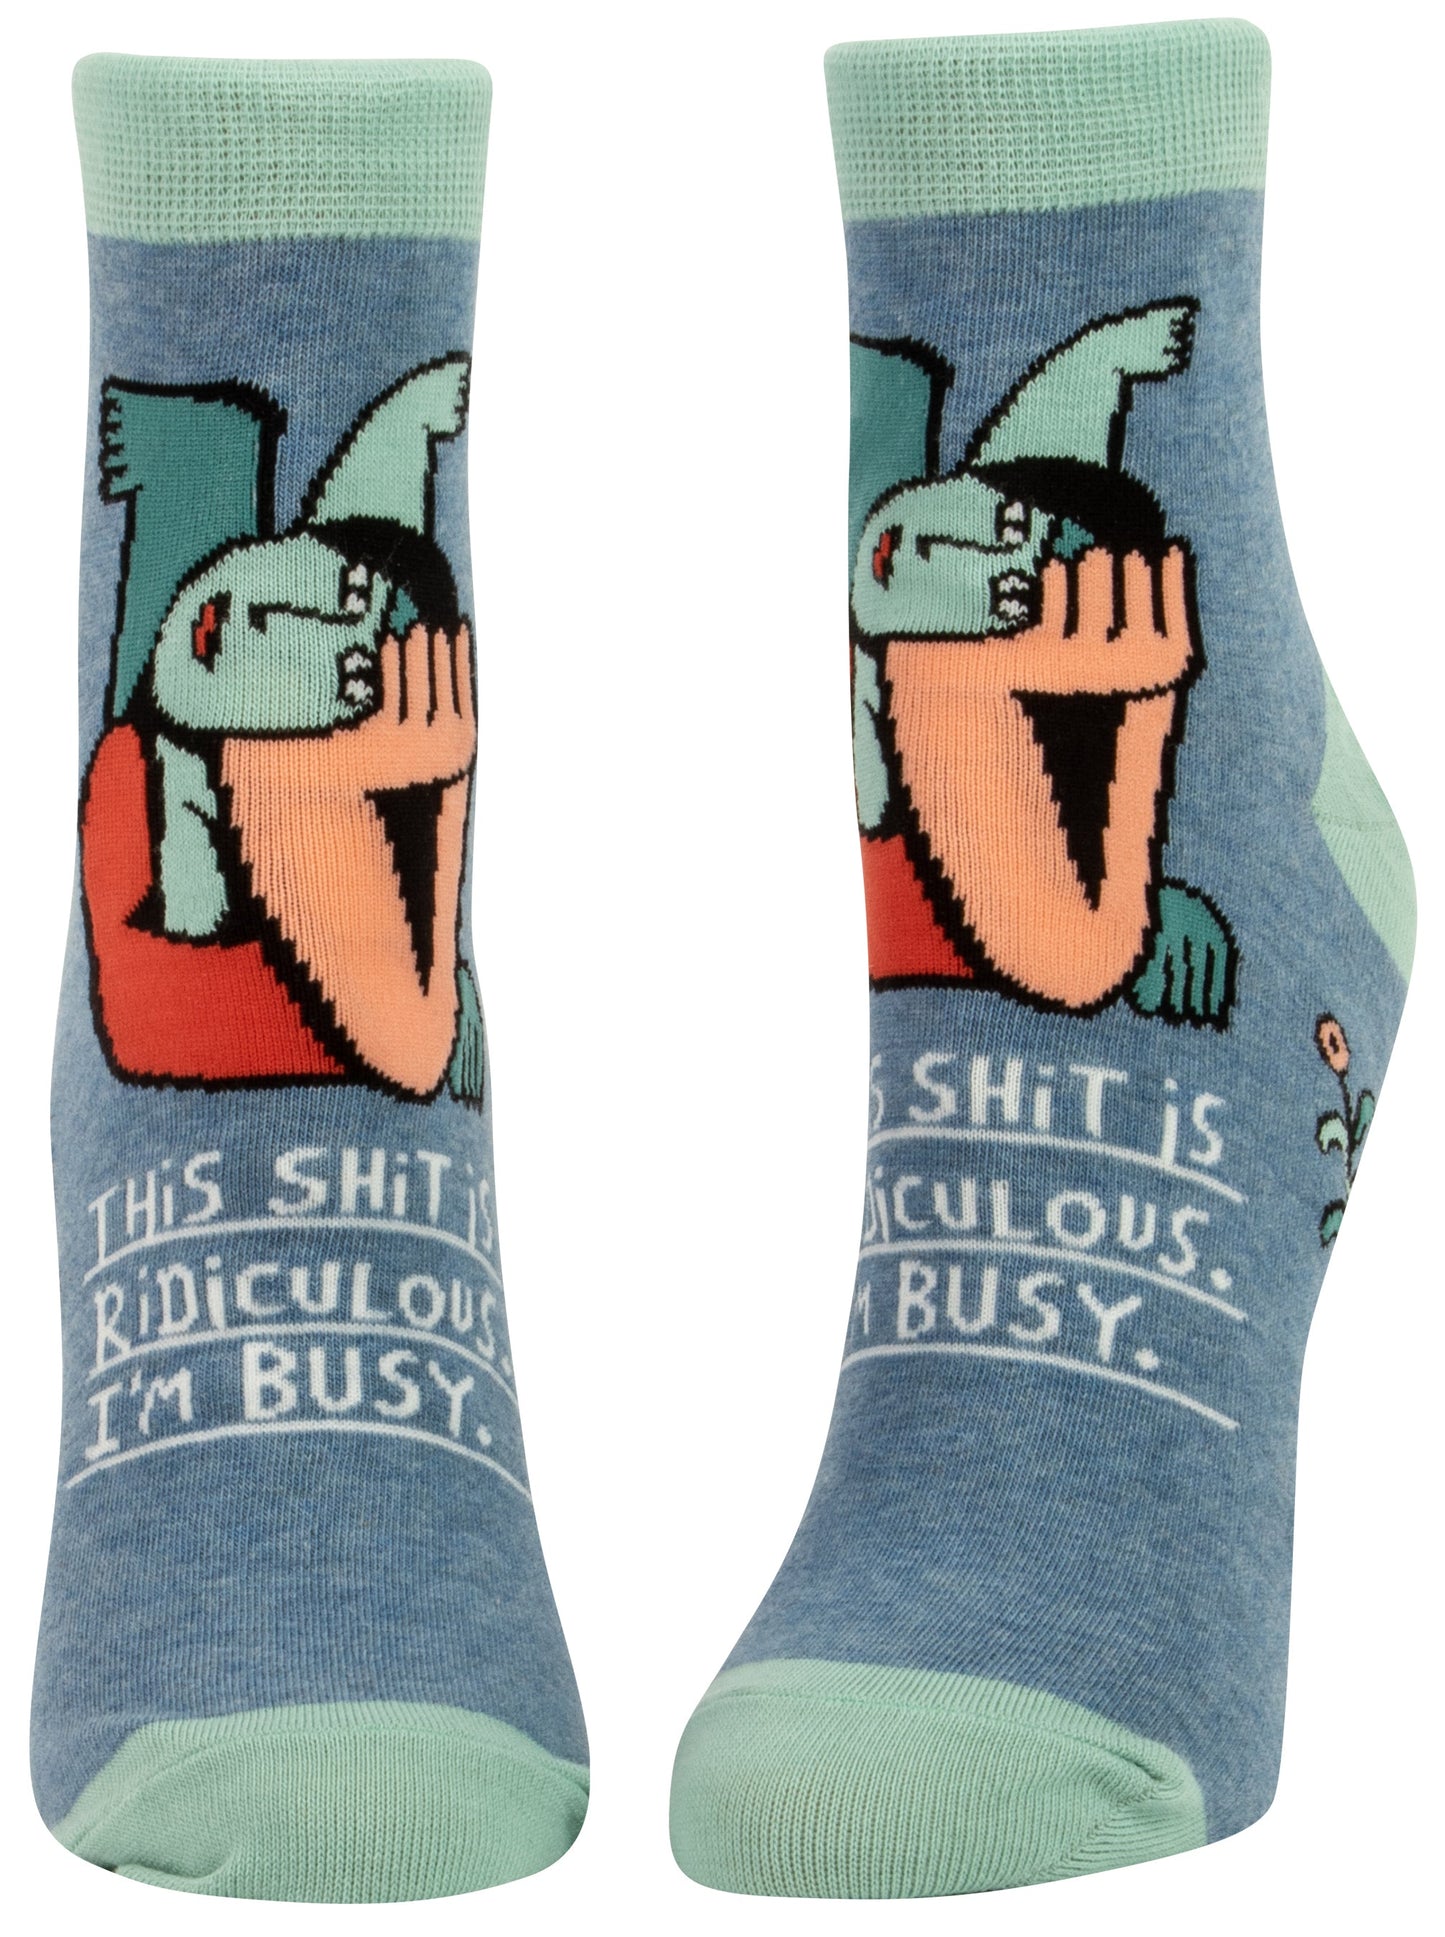 This Shit is Ridiculous. I'm Busy. Women's Ankle Socks